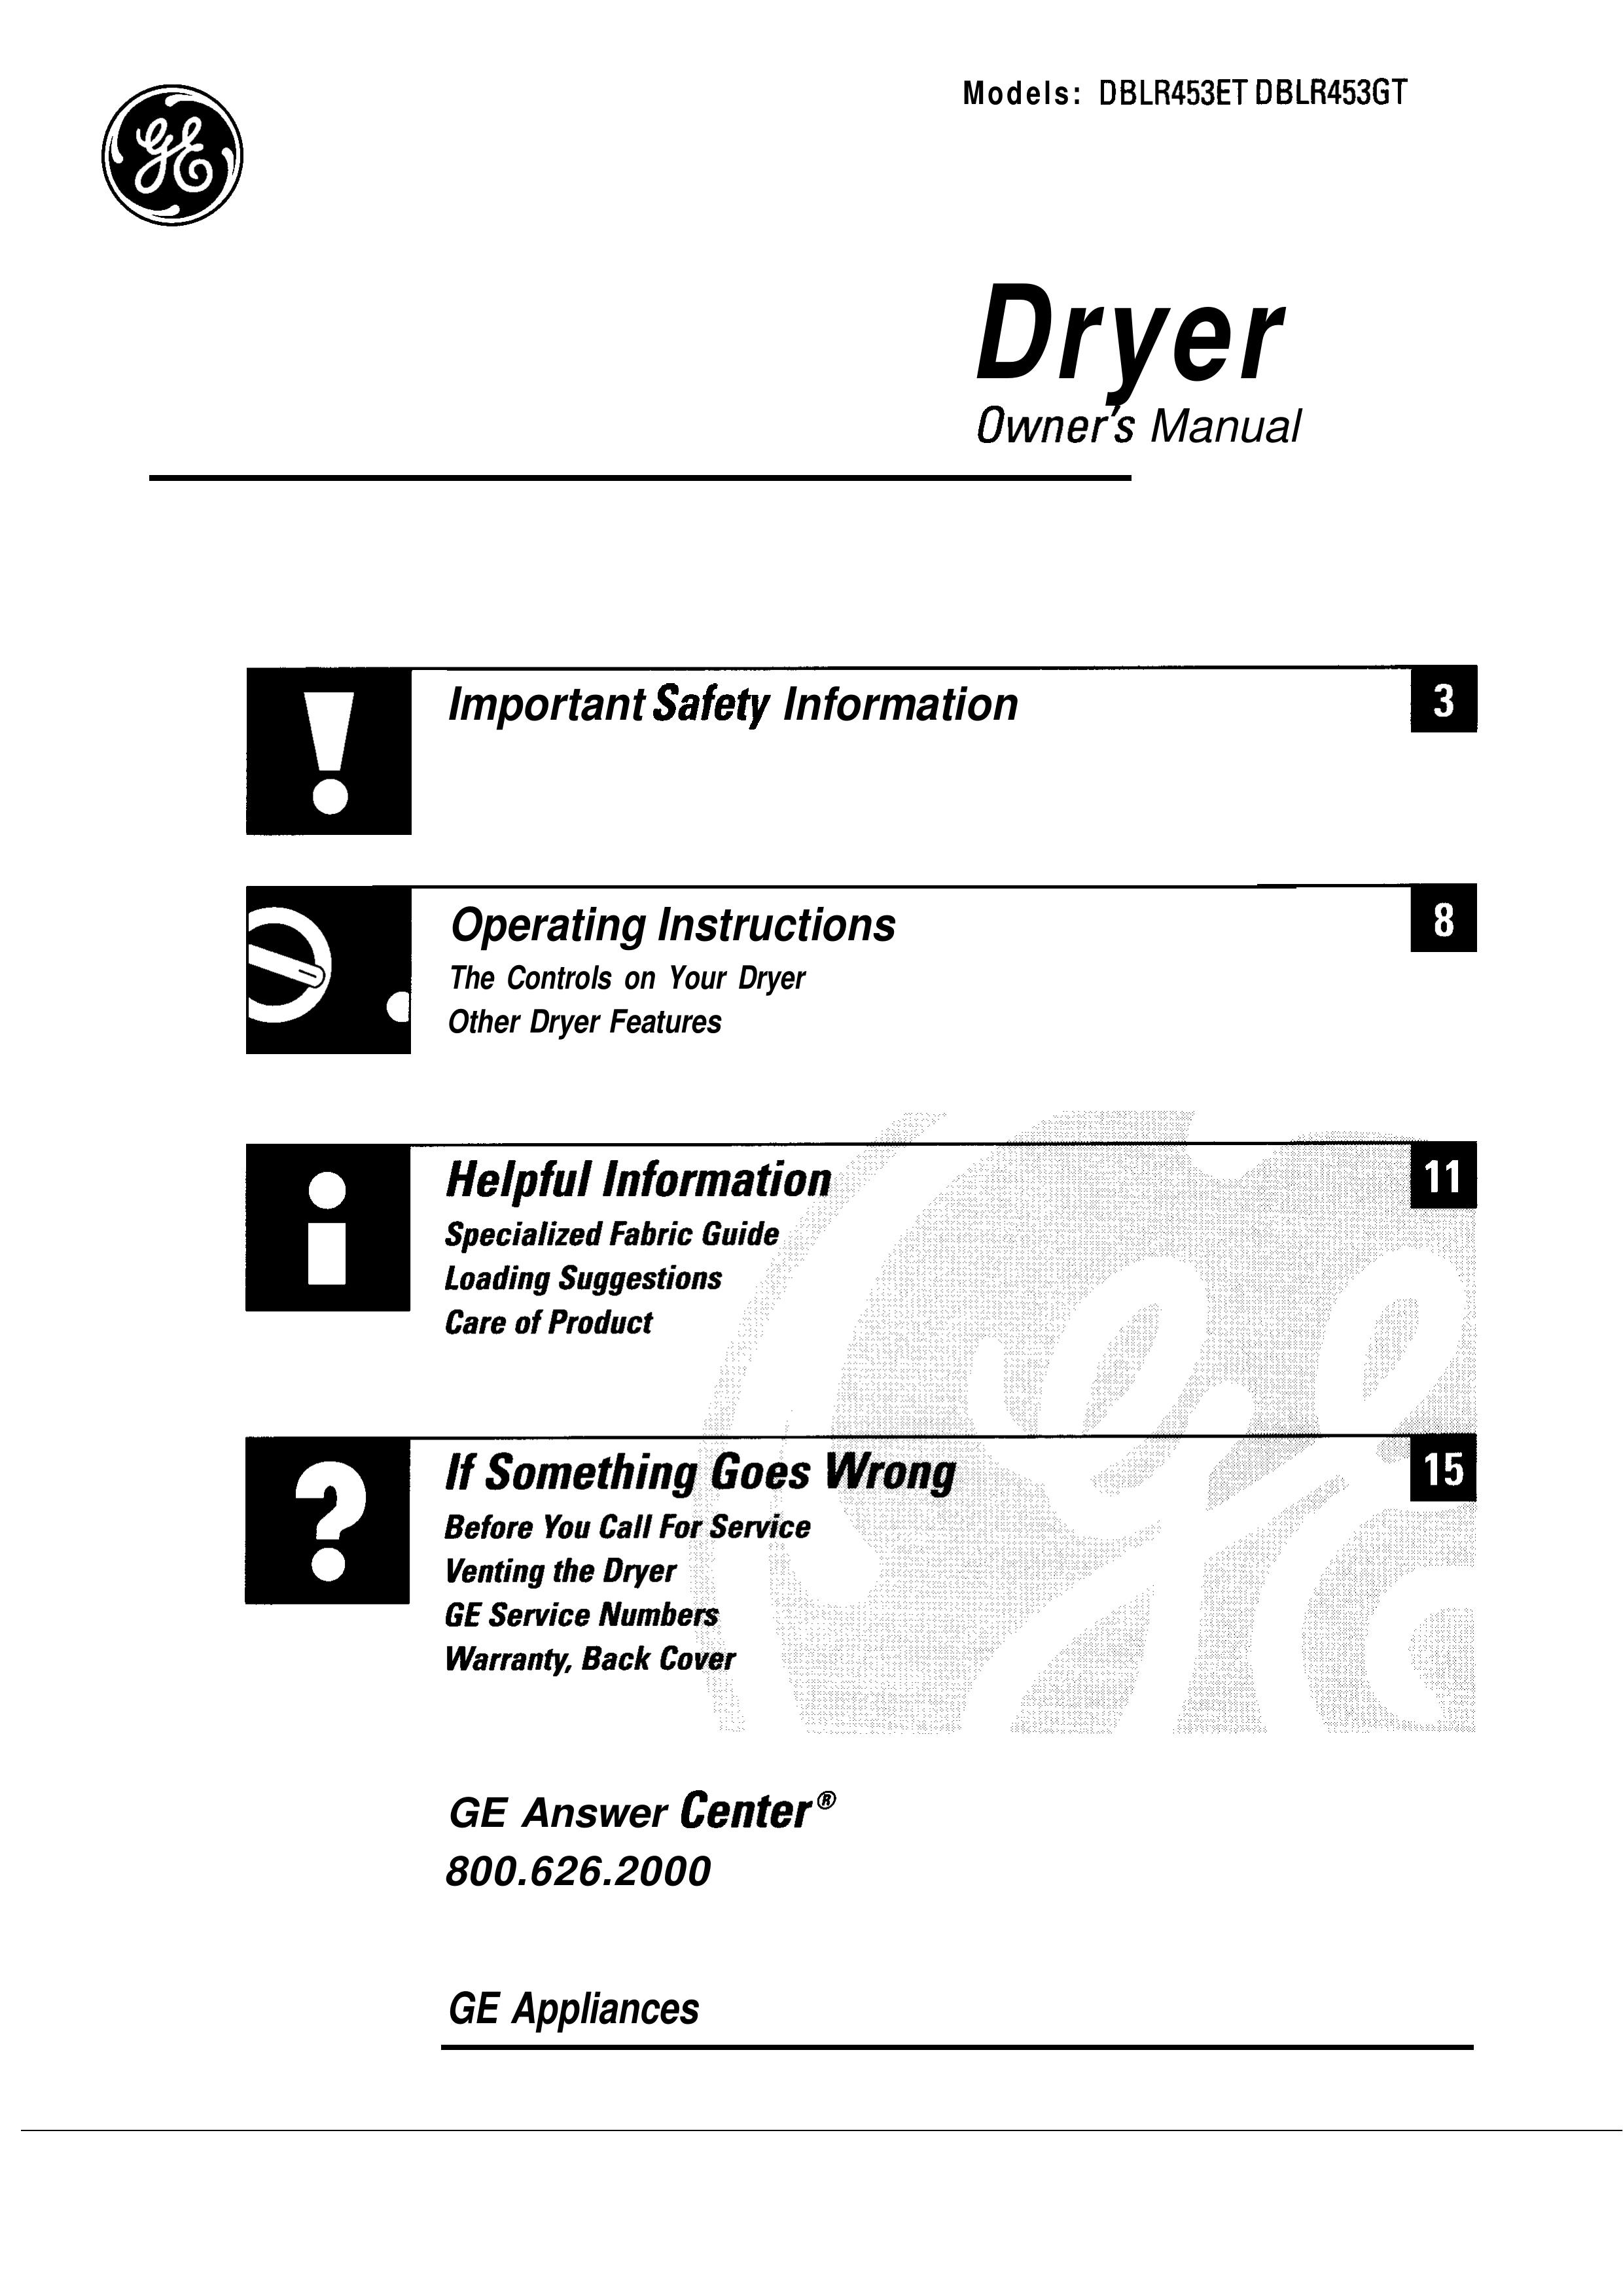 GE DBLR453GT Clothes Dryer User Manual